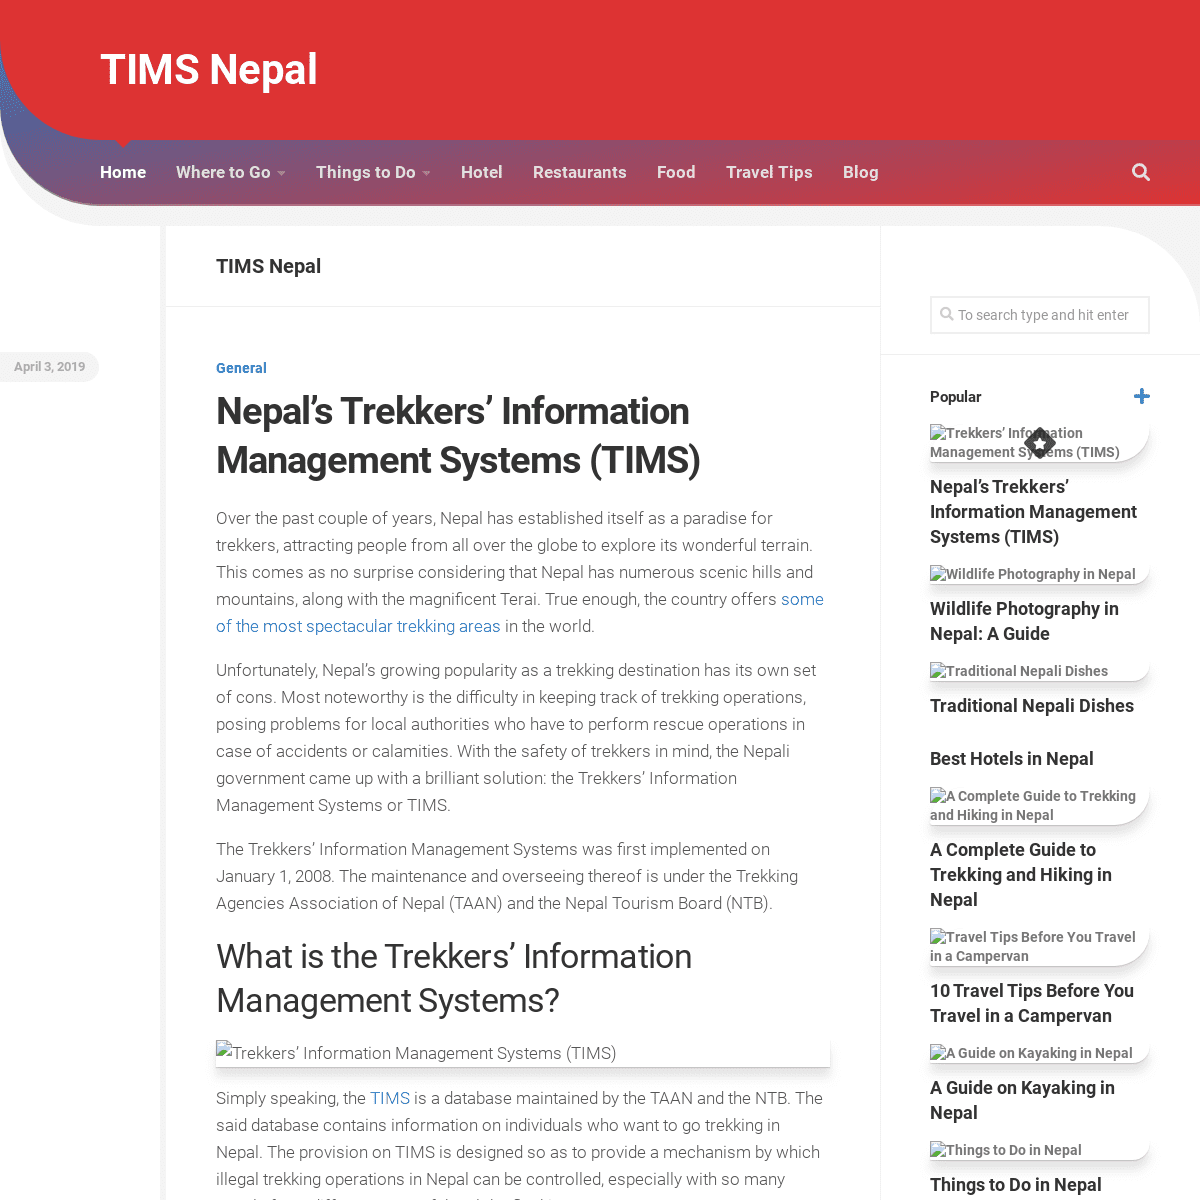 A complete backup of timsnepal.com